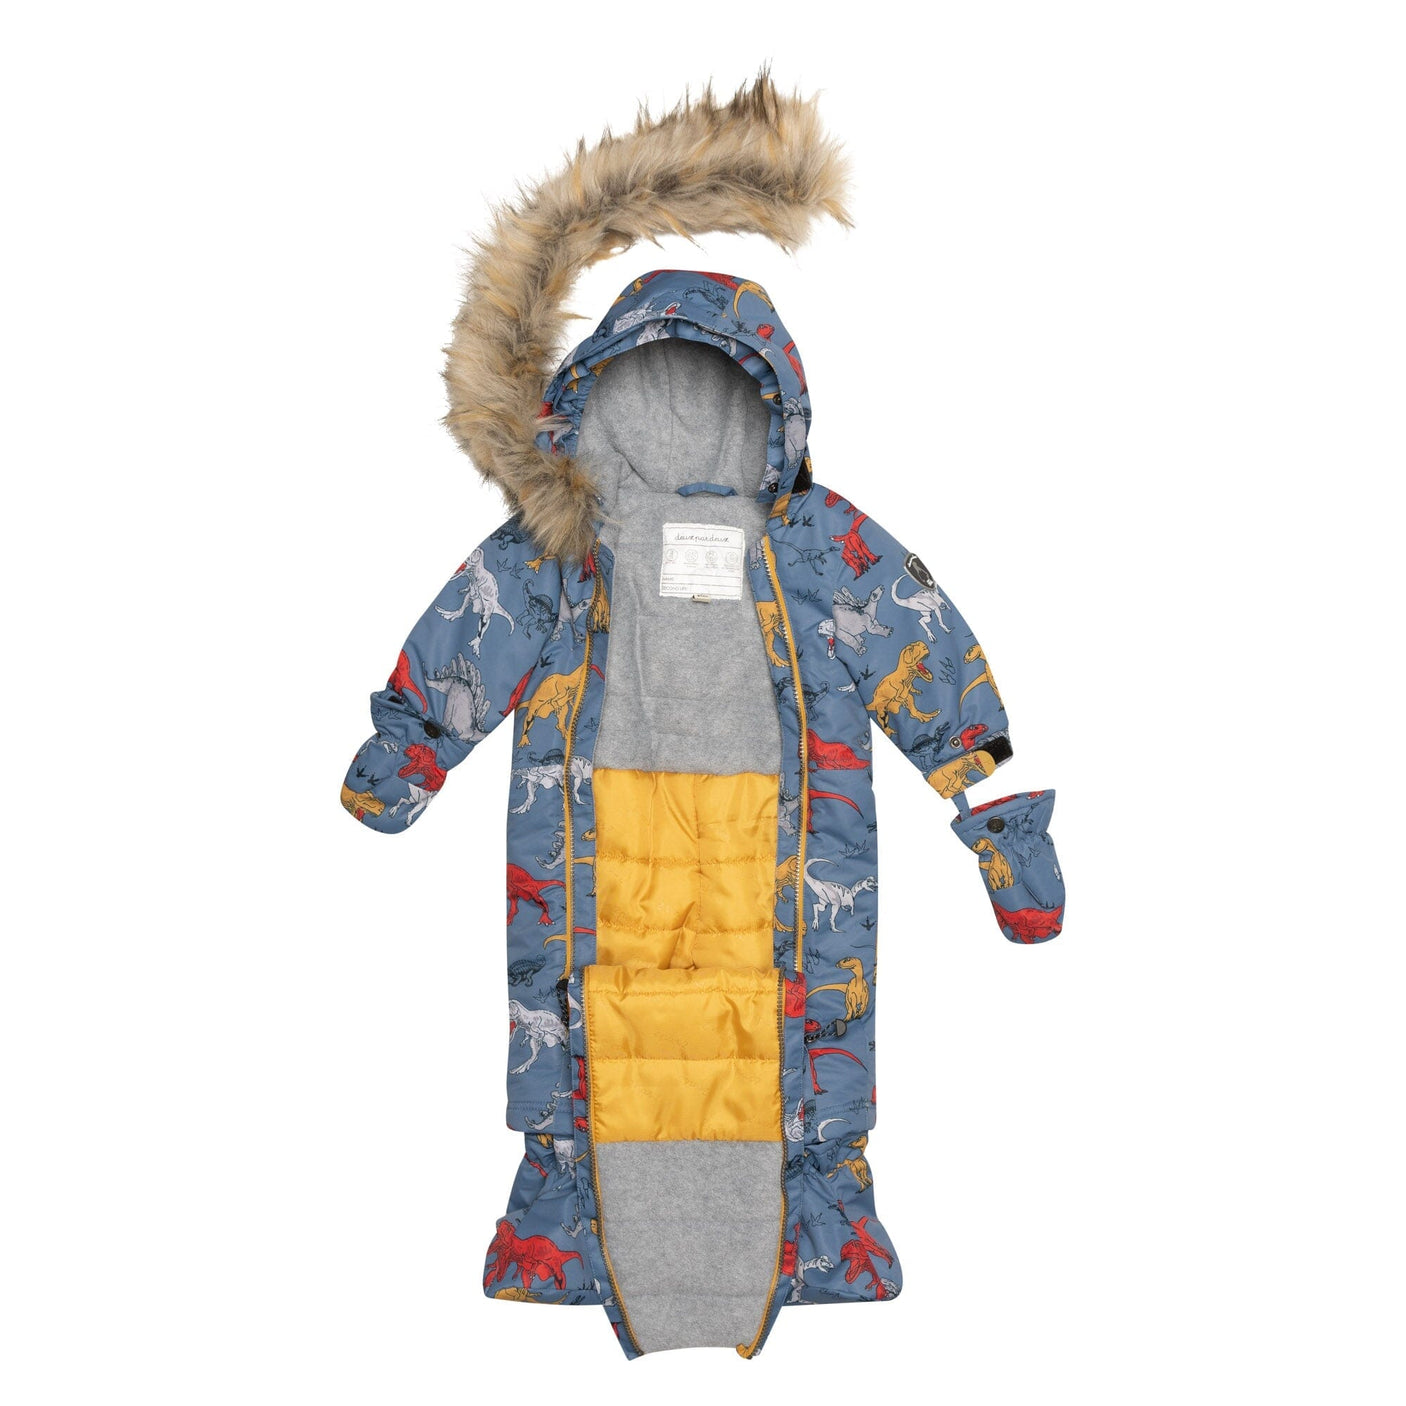 One Piece Baby Snowsuit With Dino Print-2